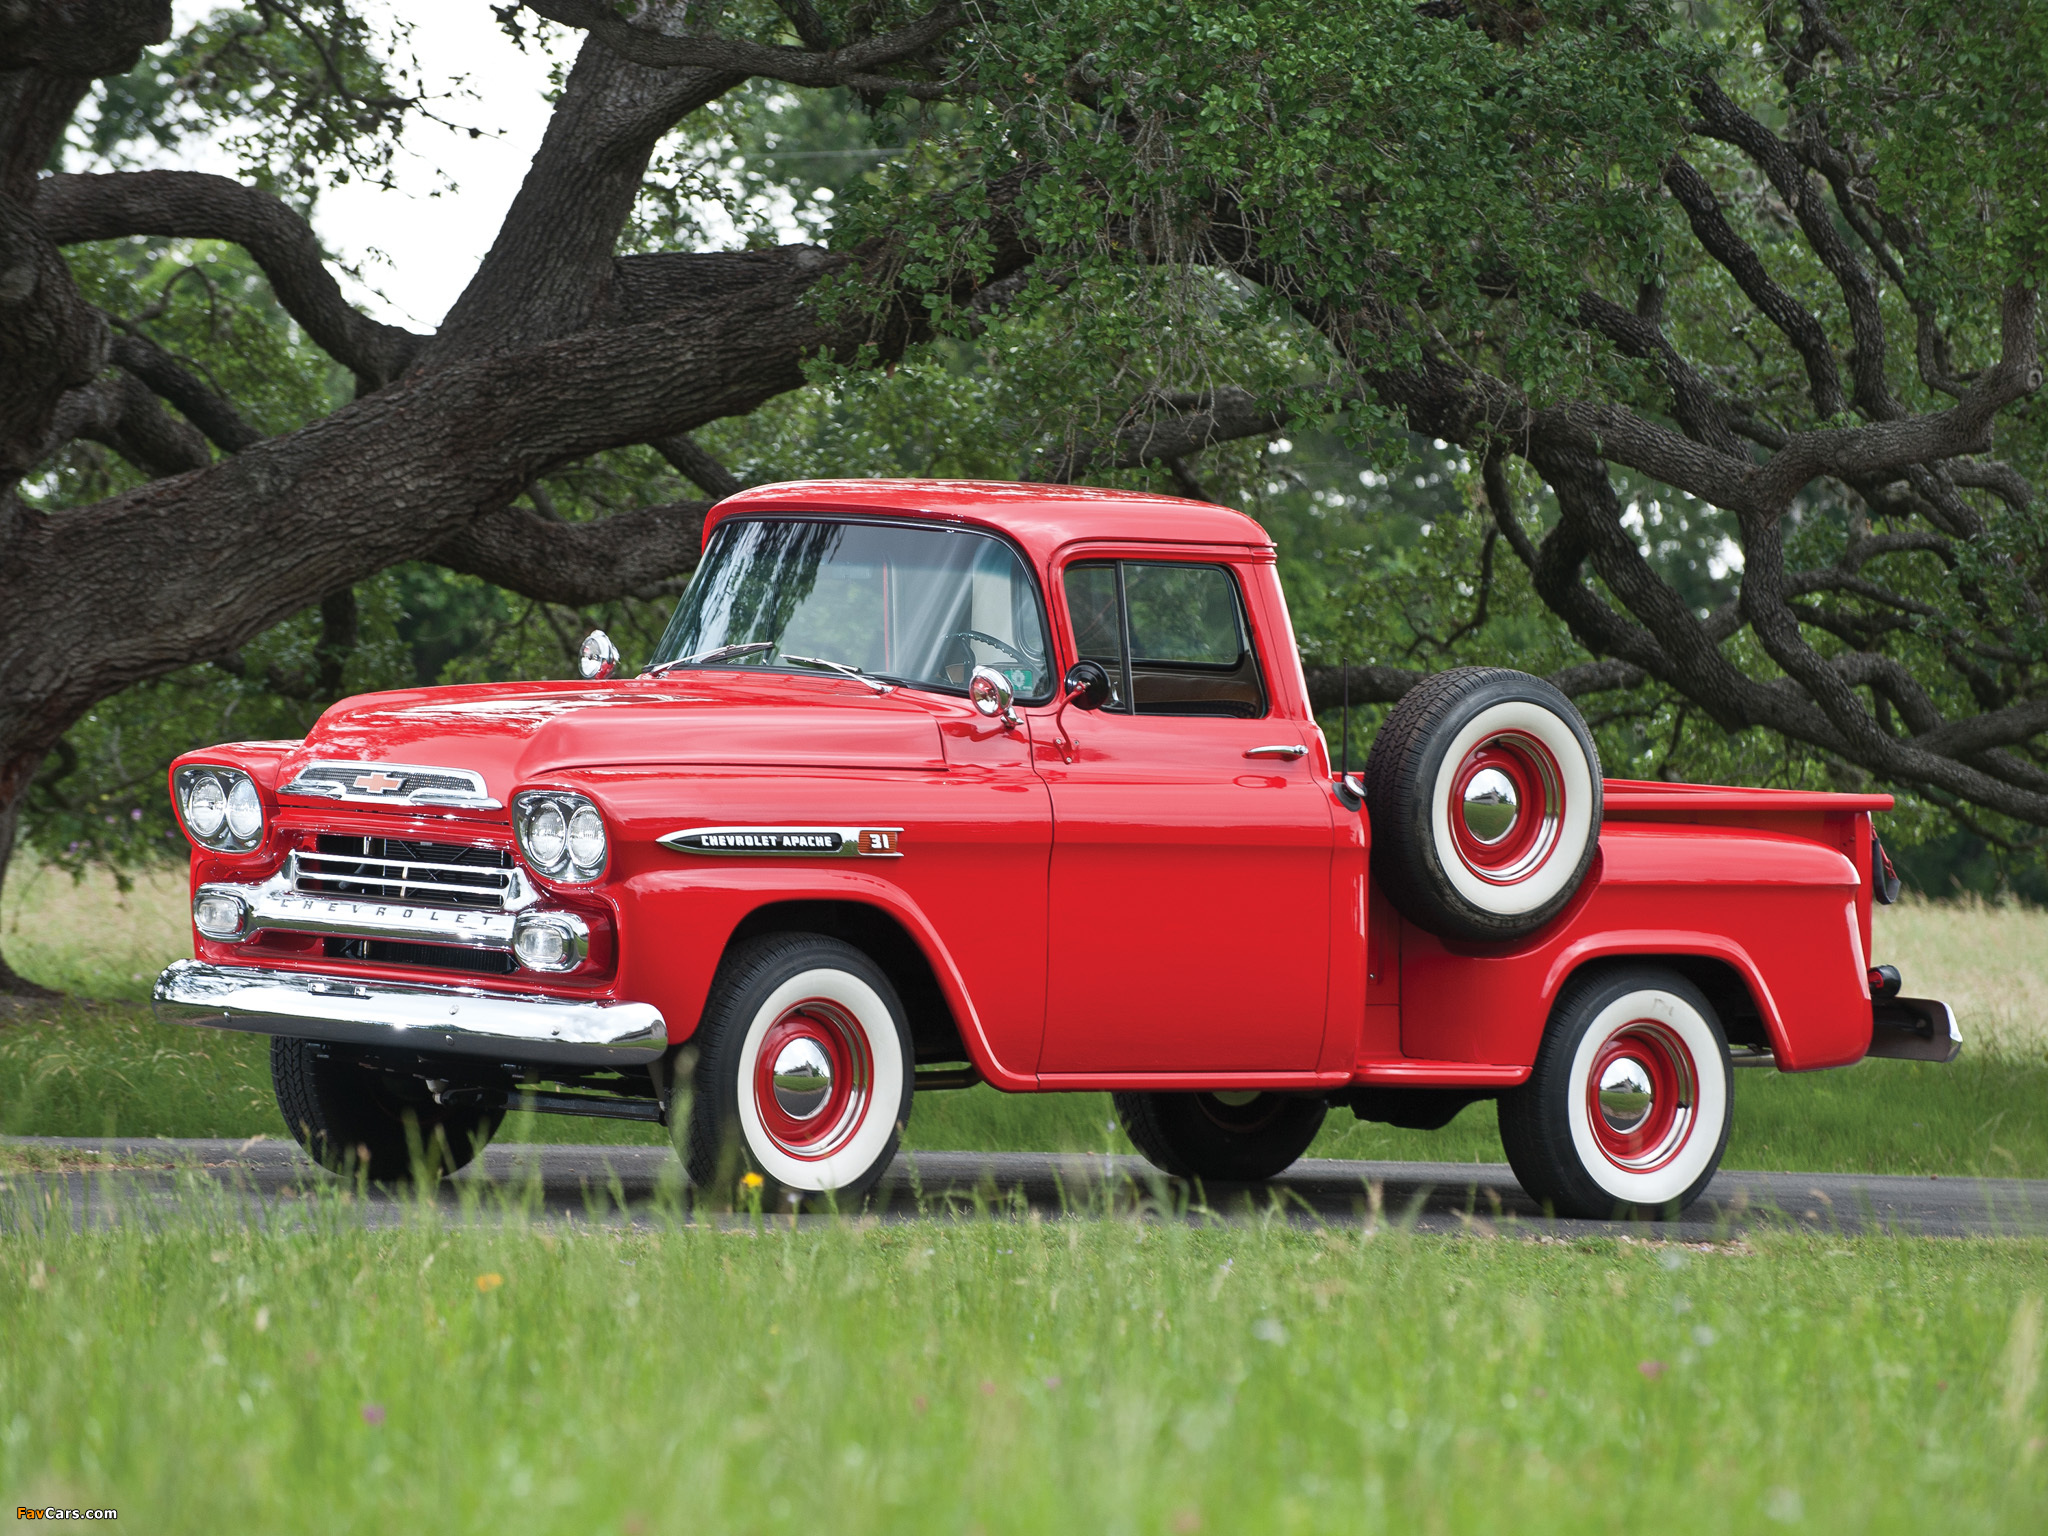 Pictures of Chevrolet Apache 31 Stepside 1959 (2048 x 1536)